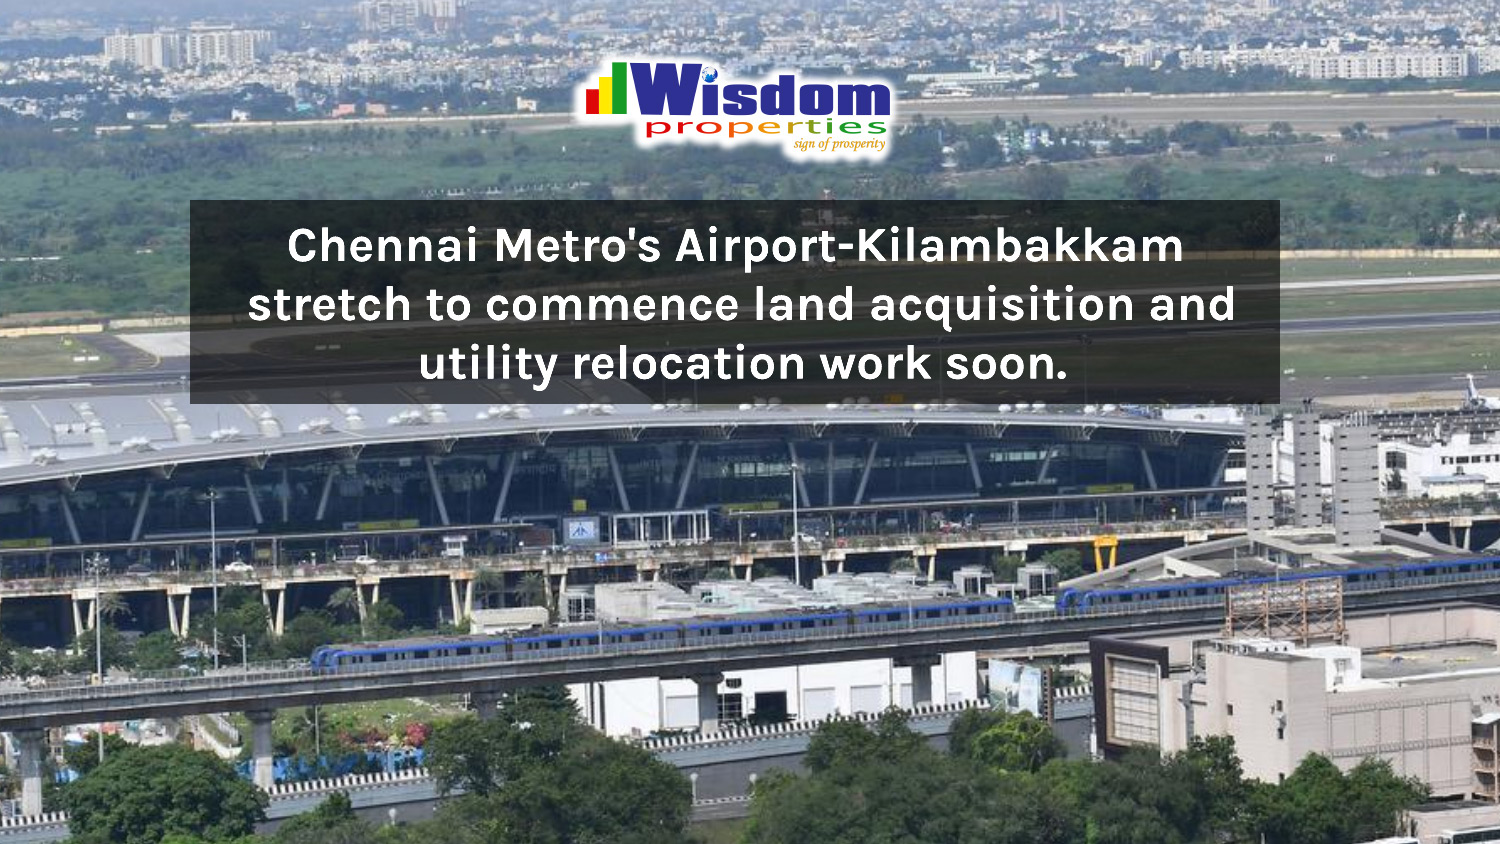 The Airport - Kilambakkam leg of the Chennai Metro may soon start with land purchase and utility relocation